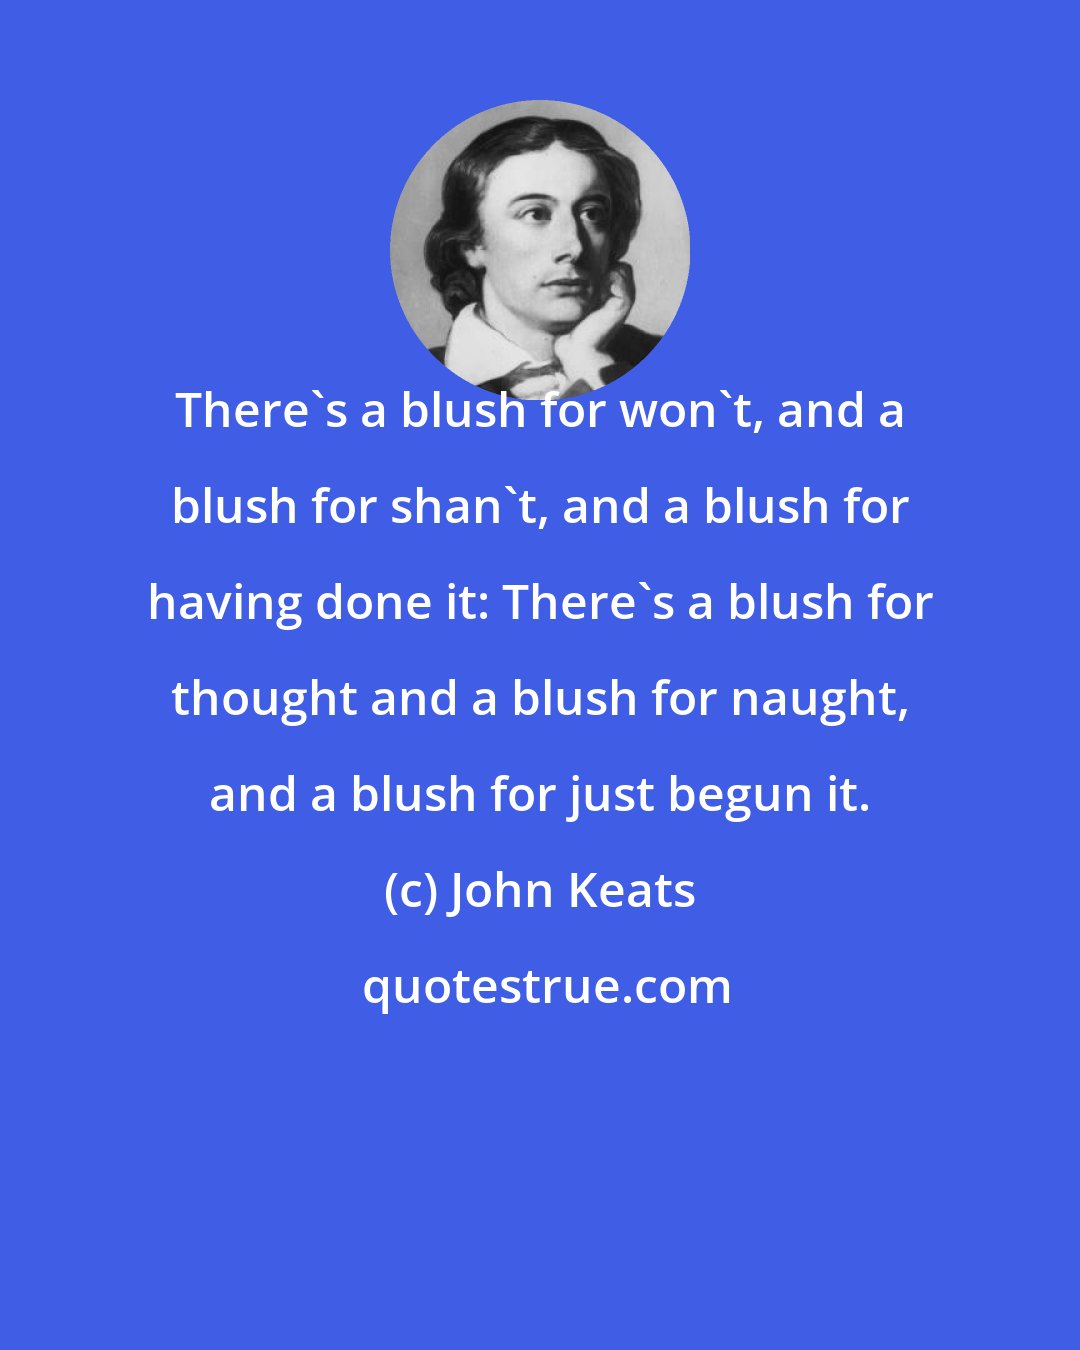 John Keats: There's a blush for won't, and a blush for shan't, and a blush for having done it: There's a blush for thought and a blush for naught, and a blush for just begun it.